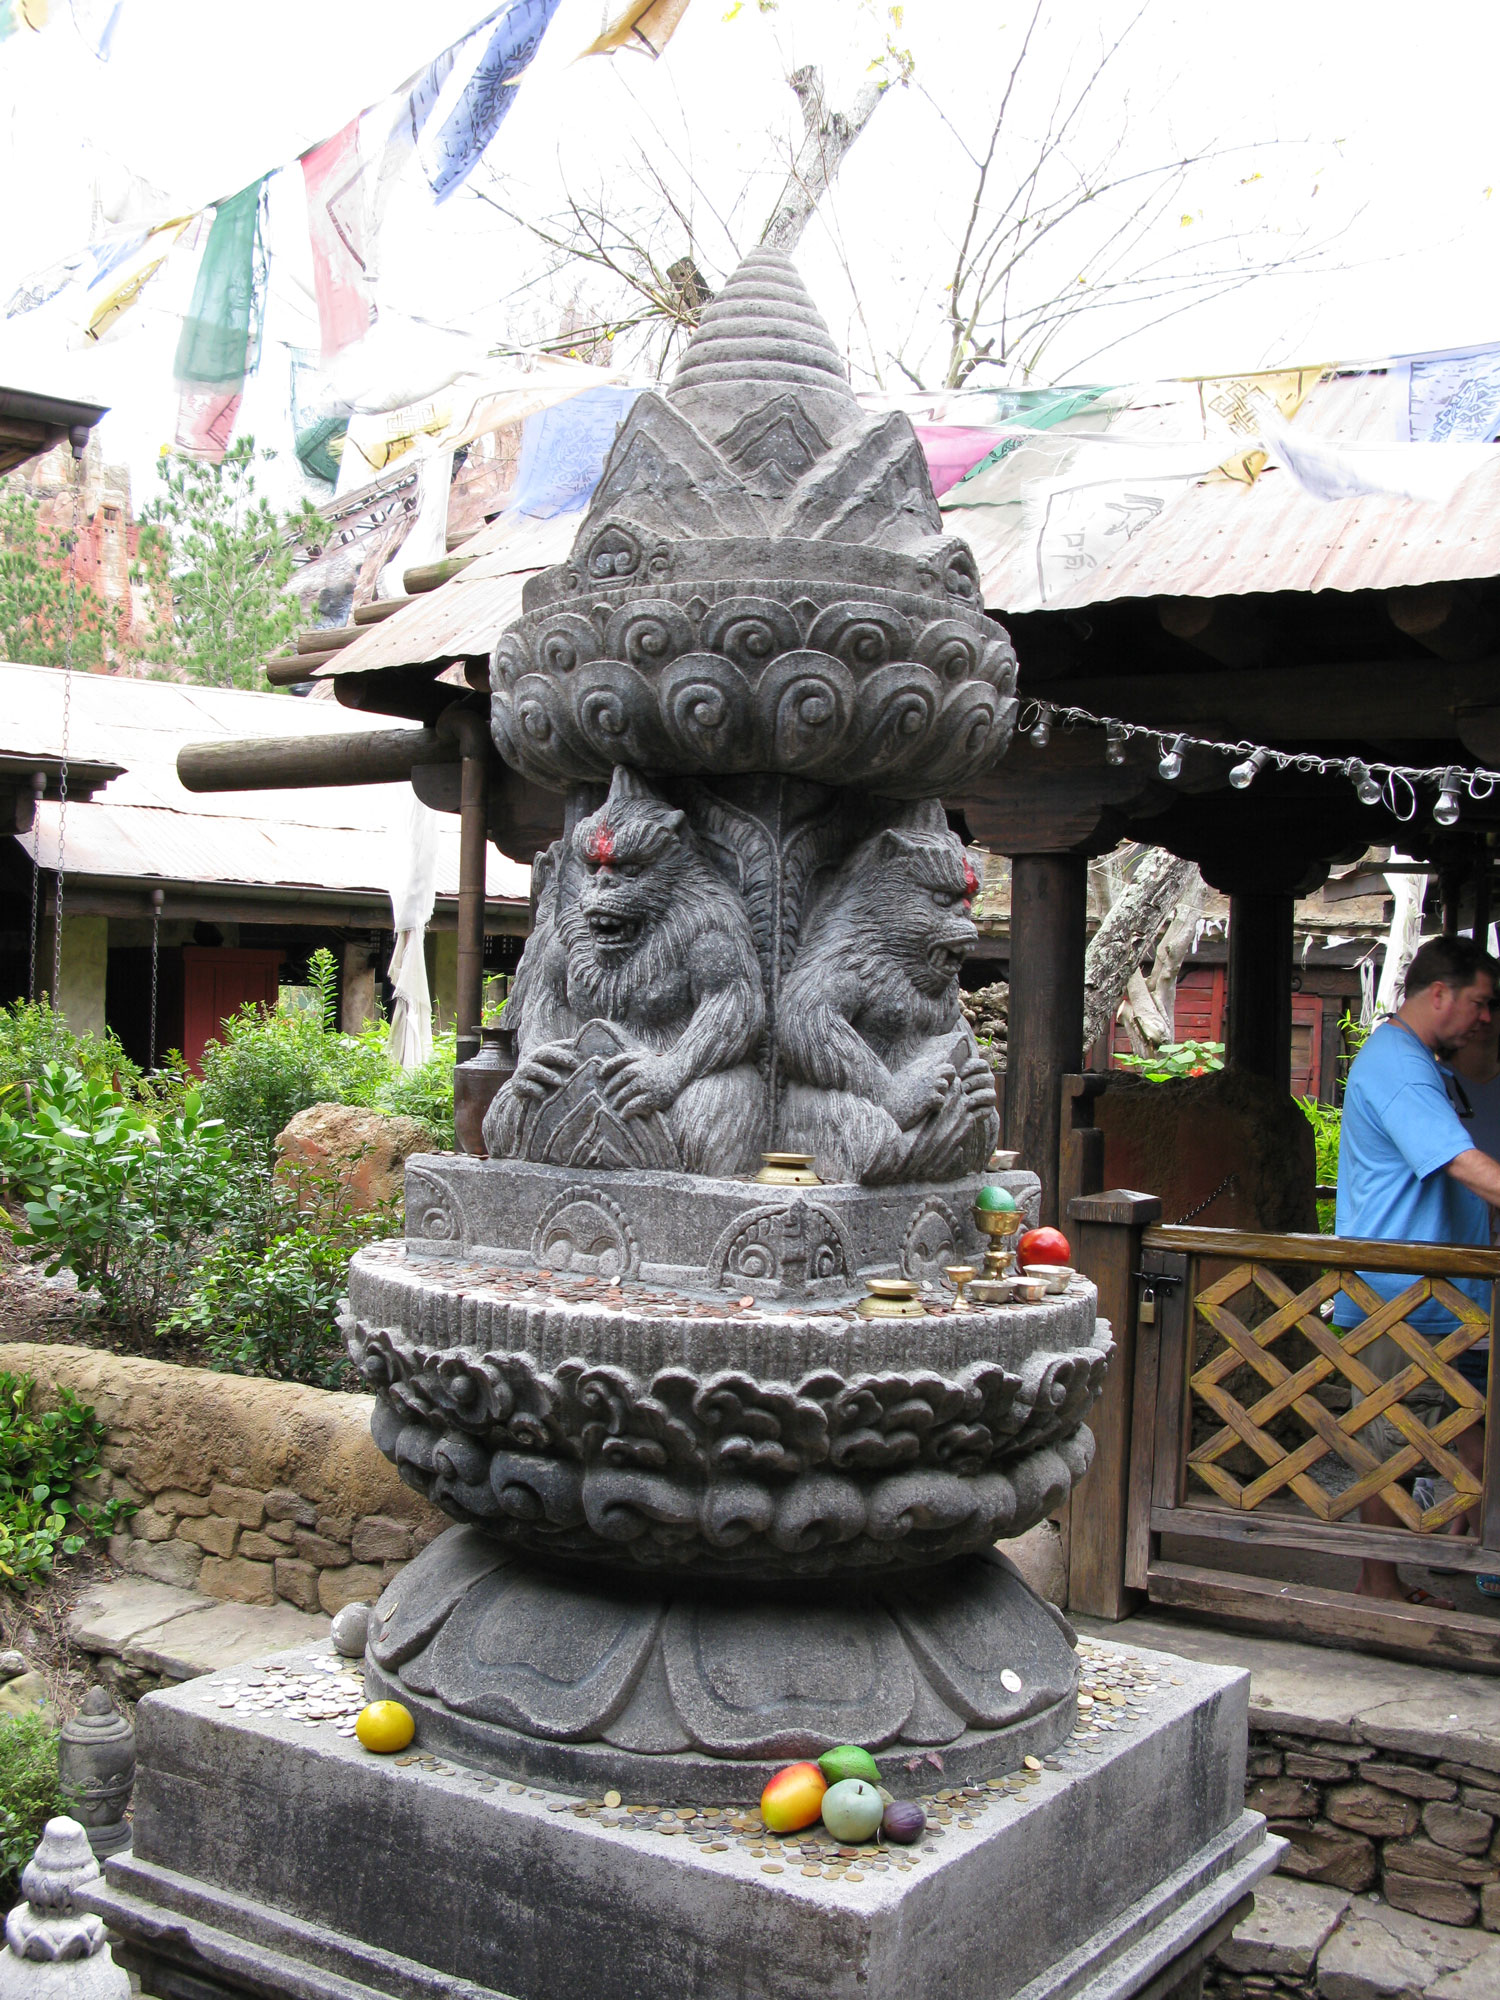 Expedition Everest statue